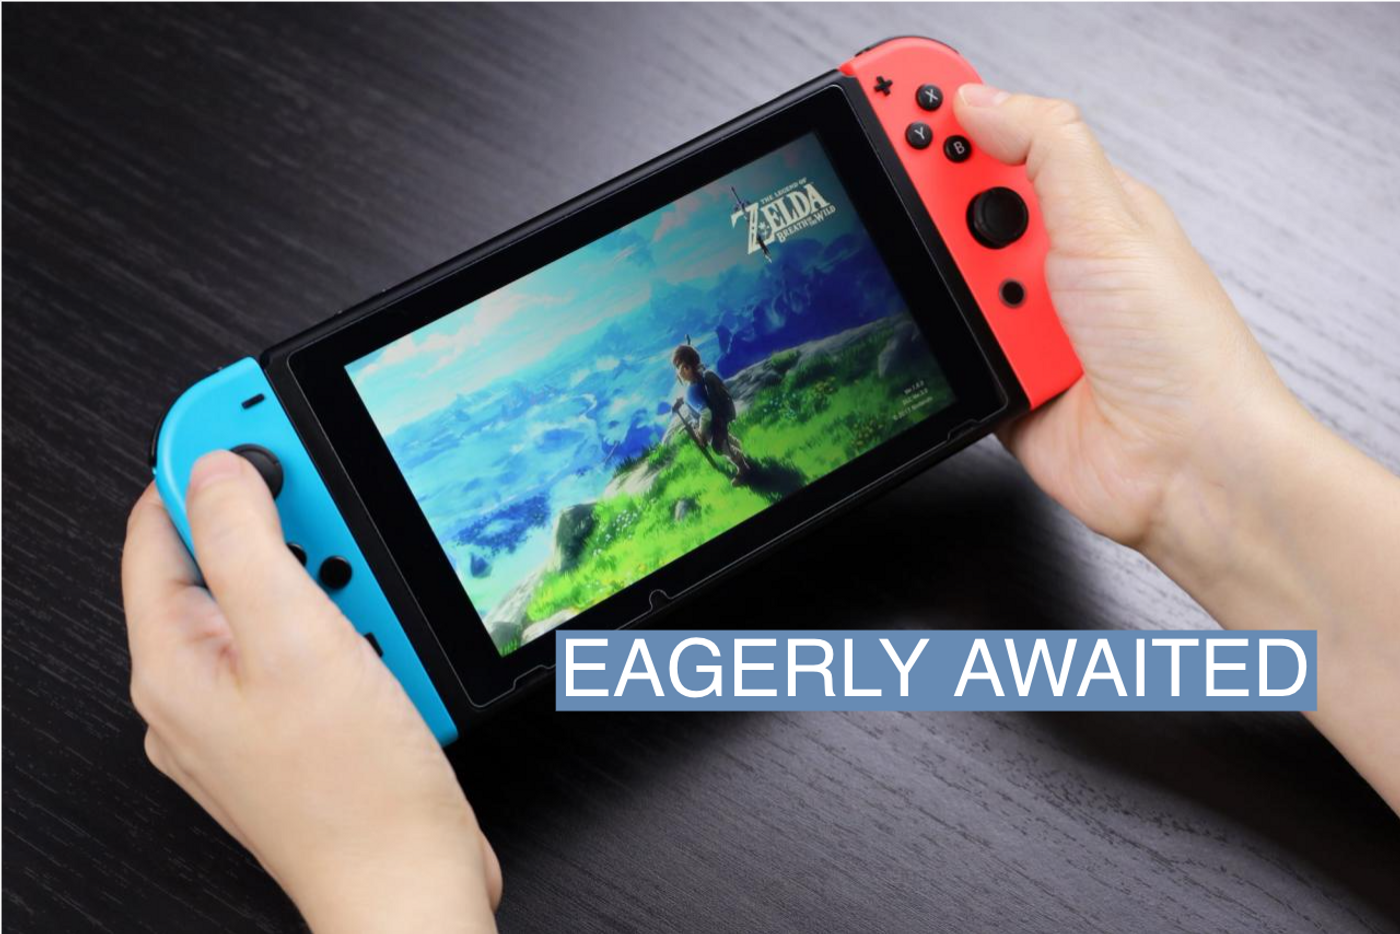 rl playing The Legend of Zelda game on Nintendo Switch console in handheld mode, selective focus on a screen.